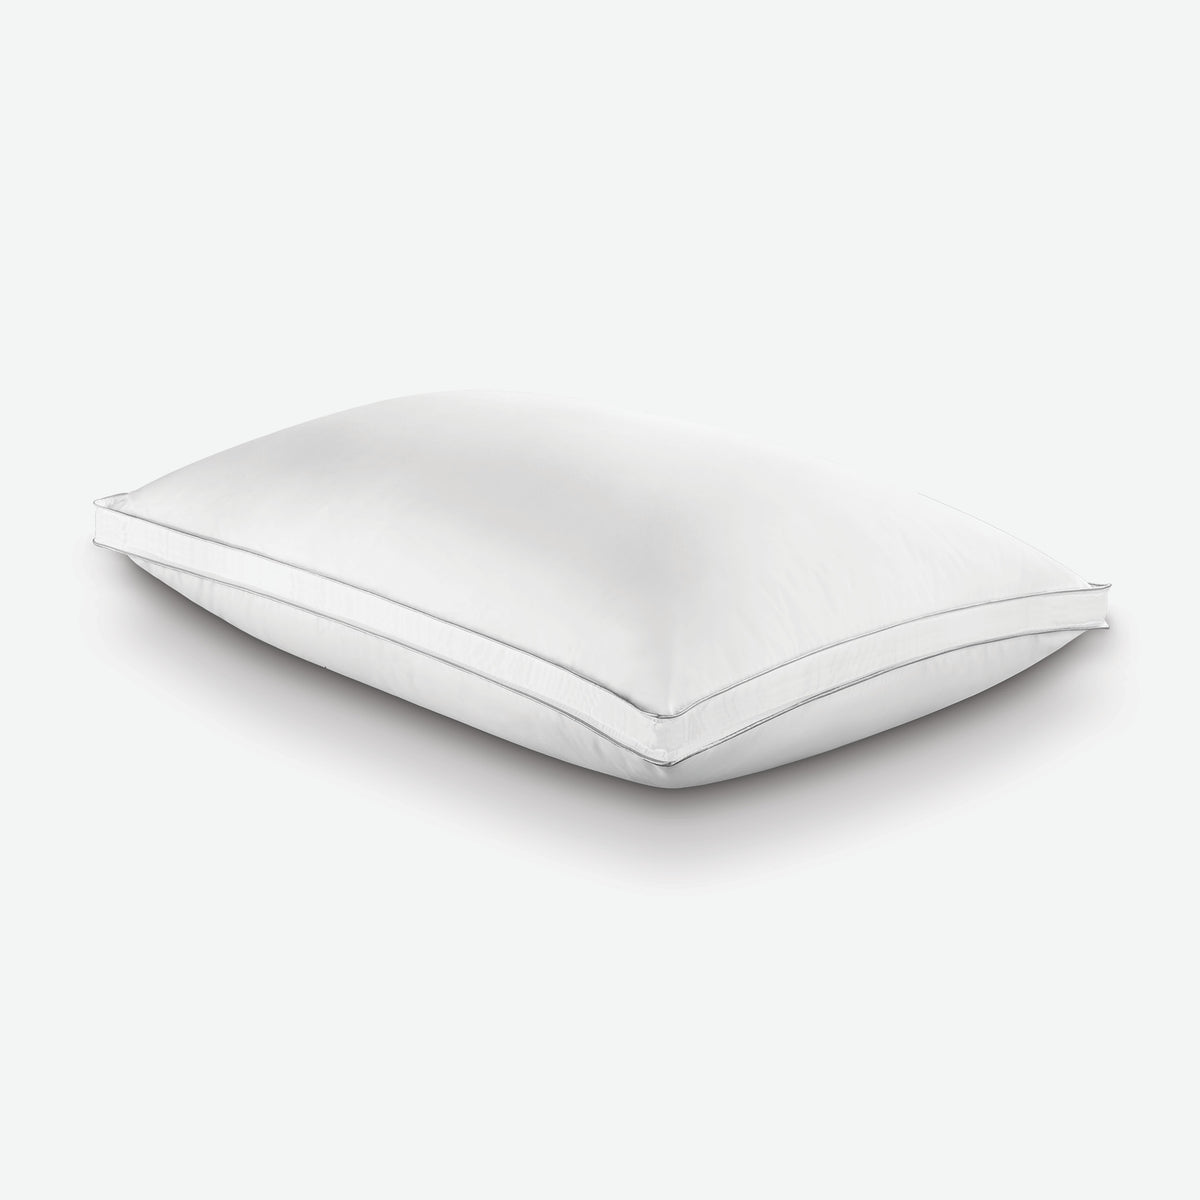 Image of a Cooling Fiber Pillow on a white background